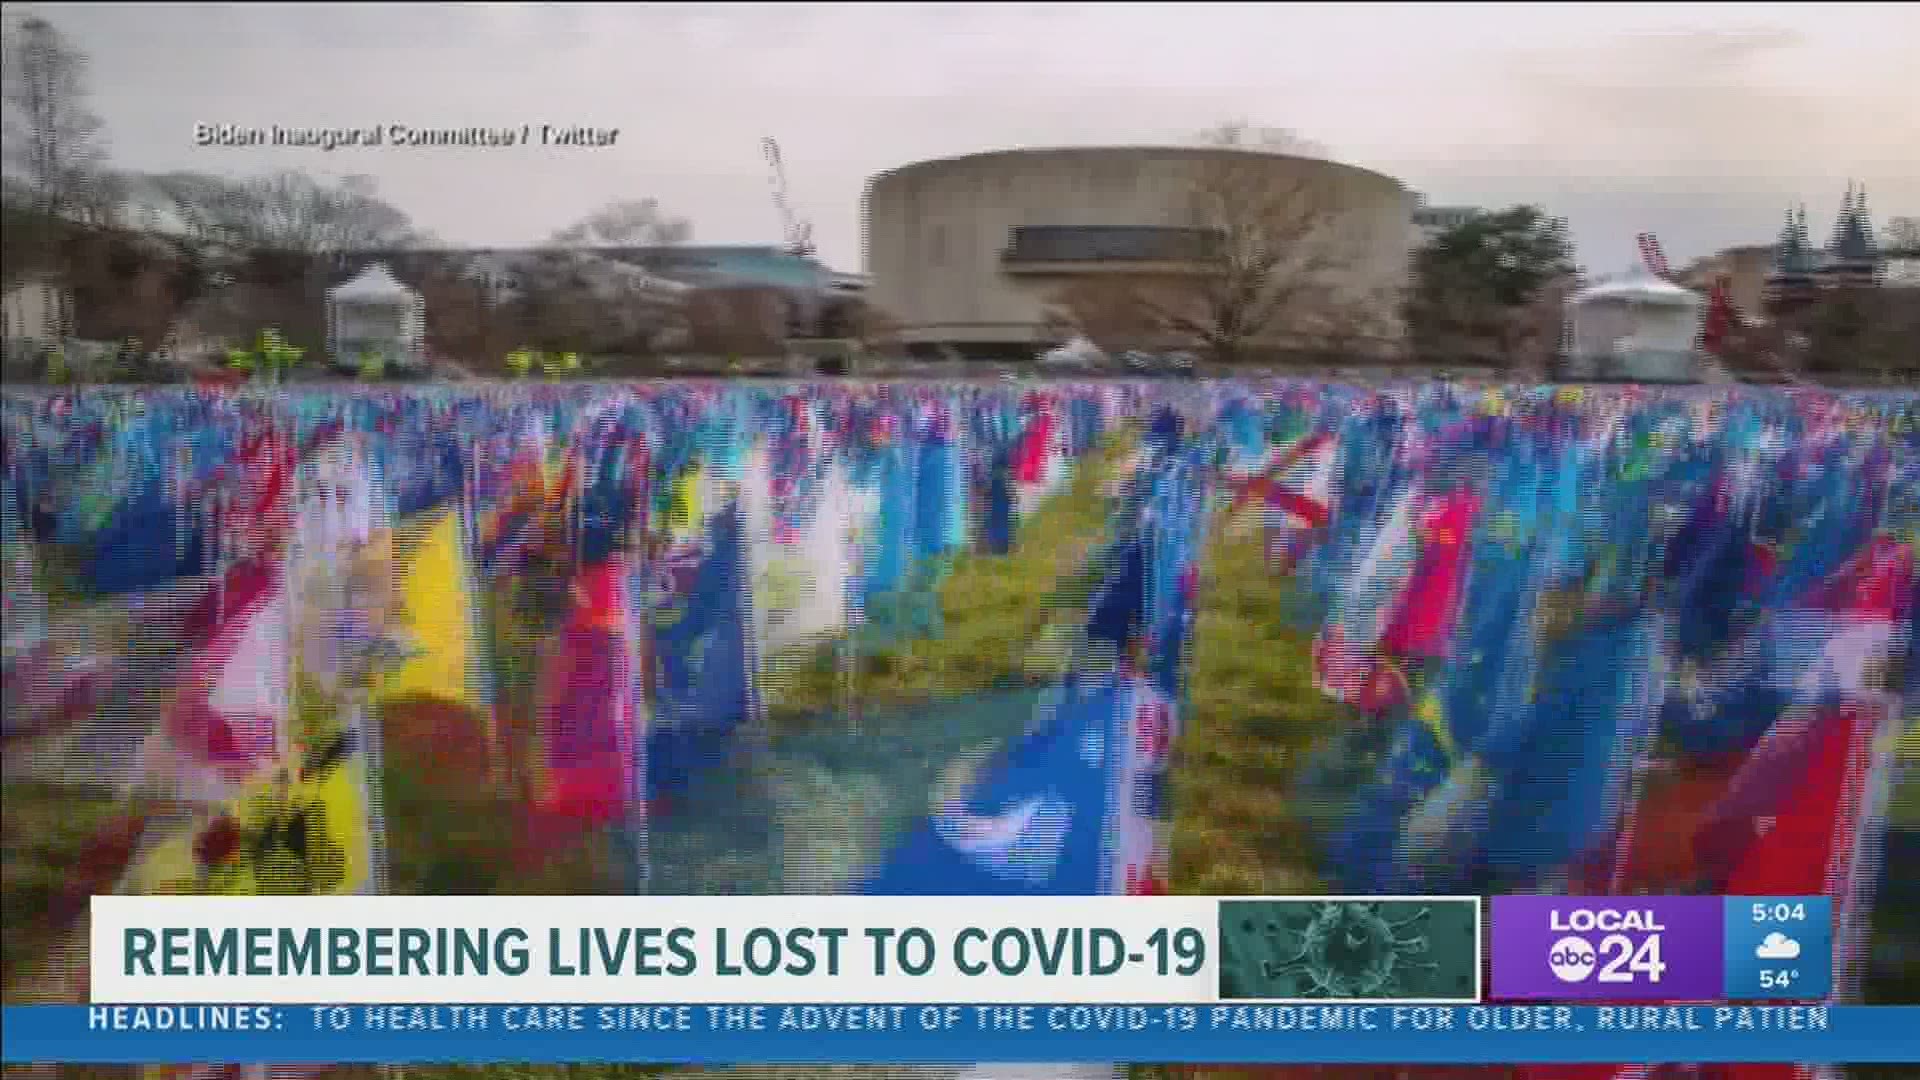 On Tuesday, the United States will hit the grim milestone of 400,000 lives lost to COVID-19. On that same day, a national memorial will be held.